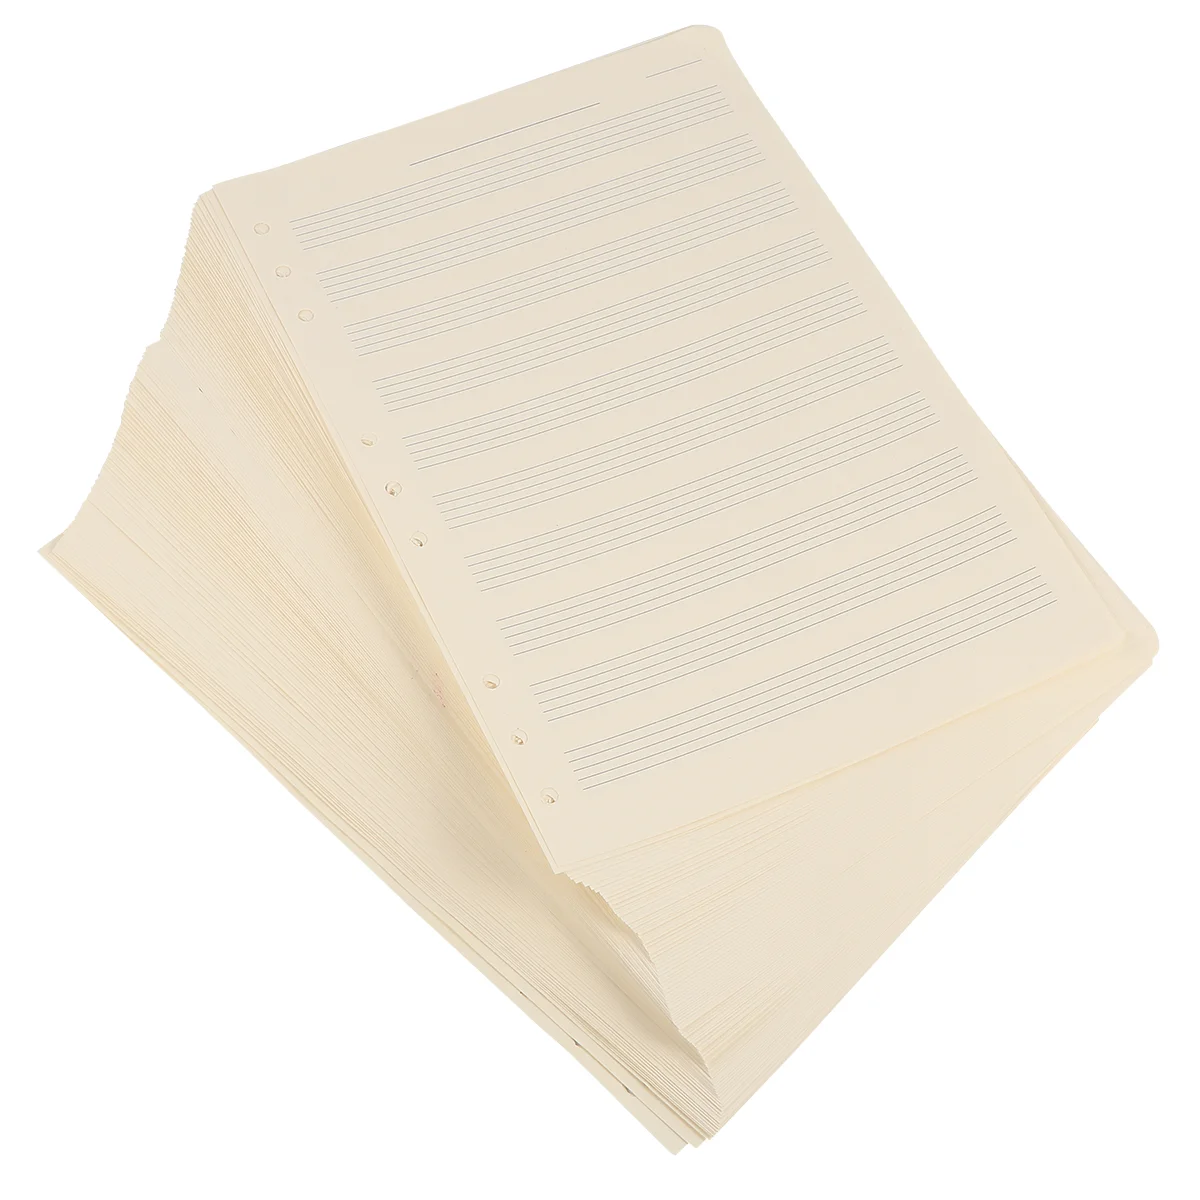 

100 Sheets The Notebook Loose-Leaf Manuscript Paper Music Refill for Musicians White Staff